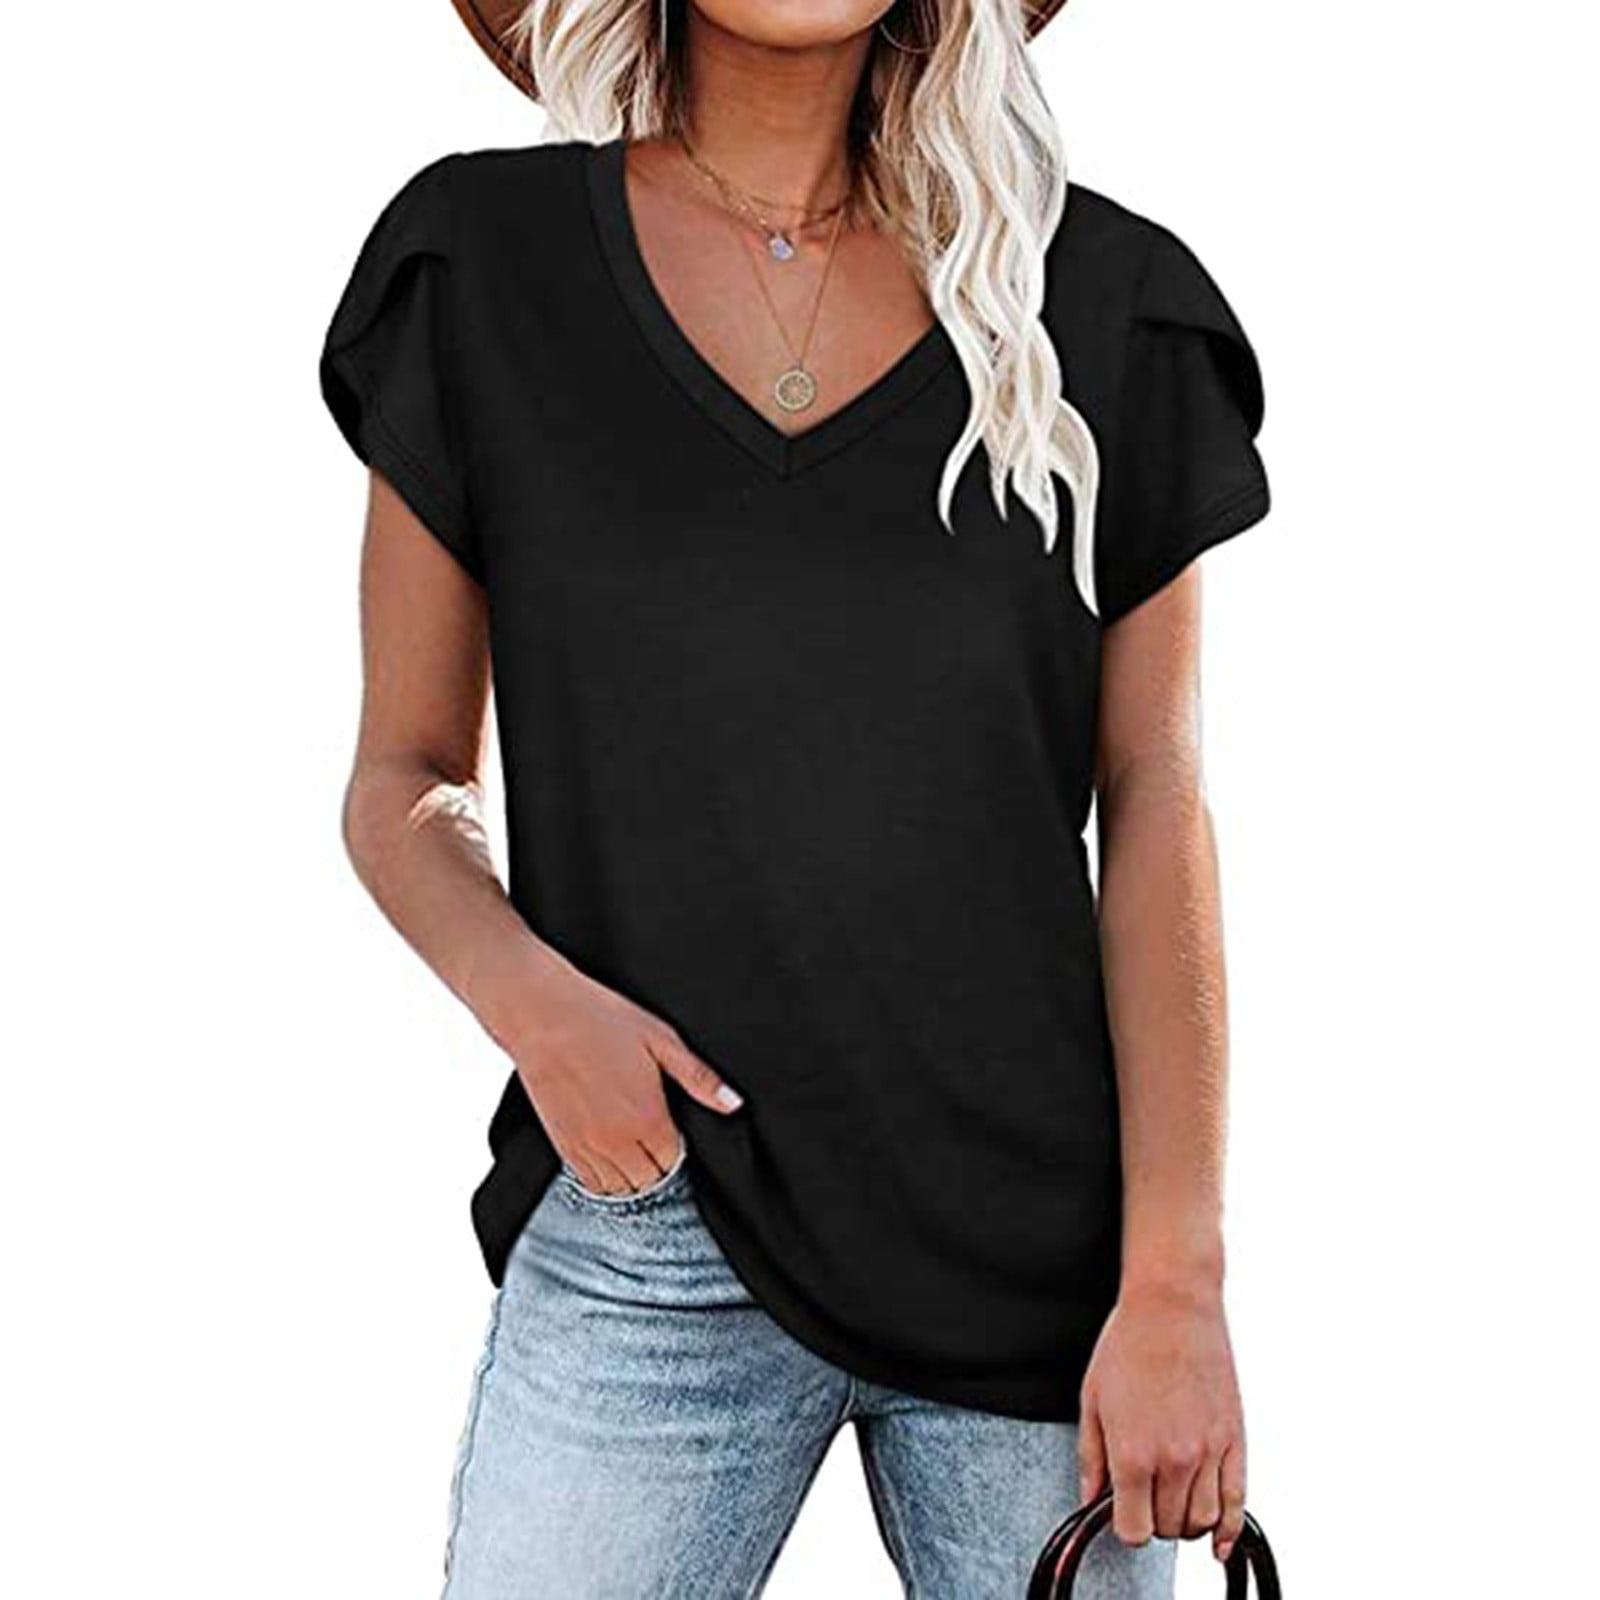 Inkach Womens Summer Short Sleeve T-Shirt ❤️ Plus Size ❤️ Cold Shoulder Lace V-Neck Blouses Tops